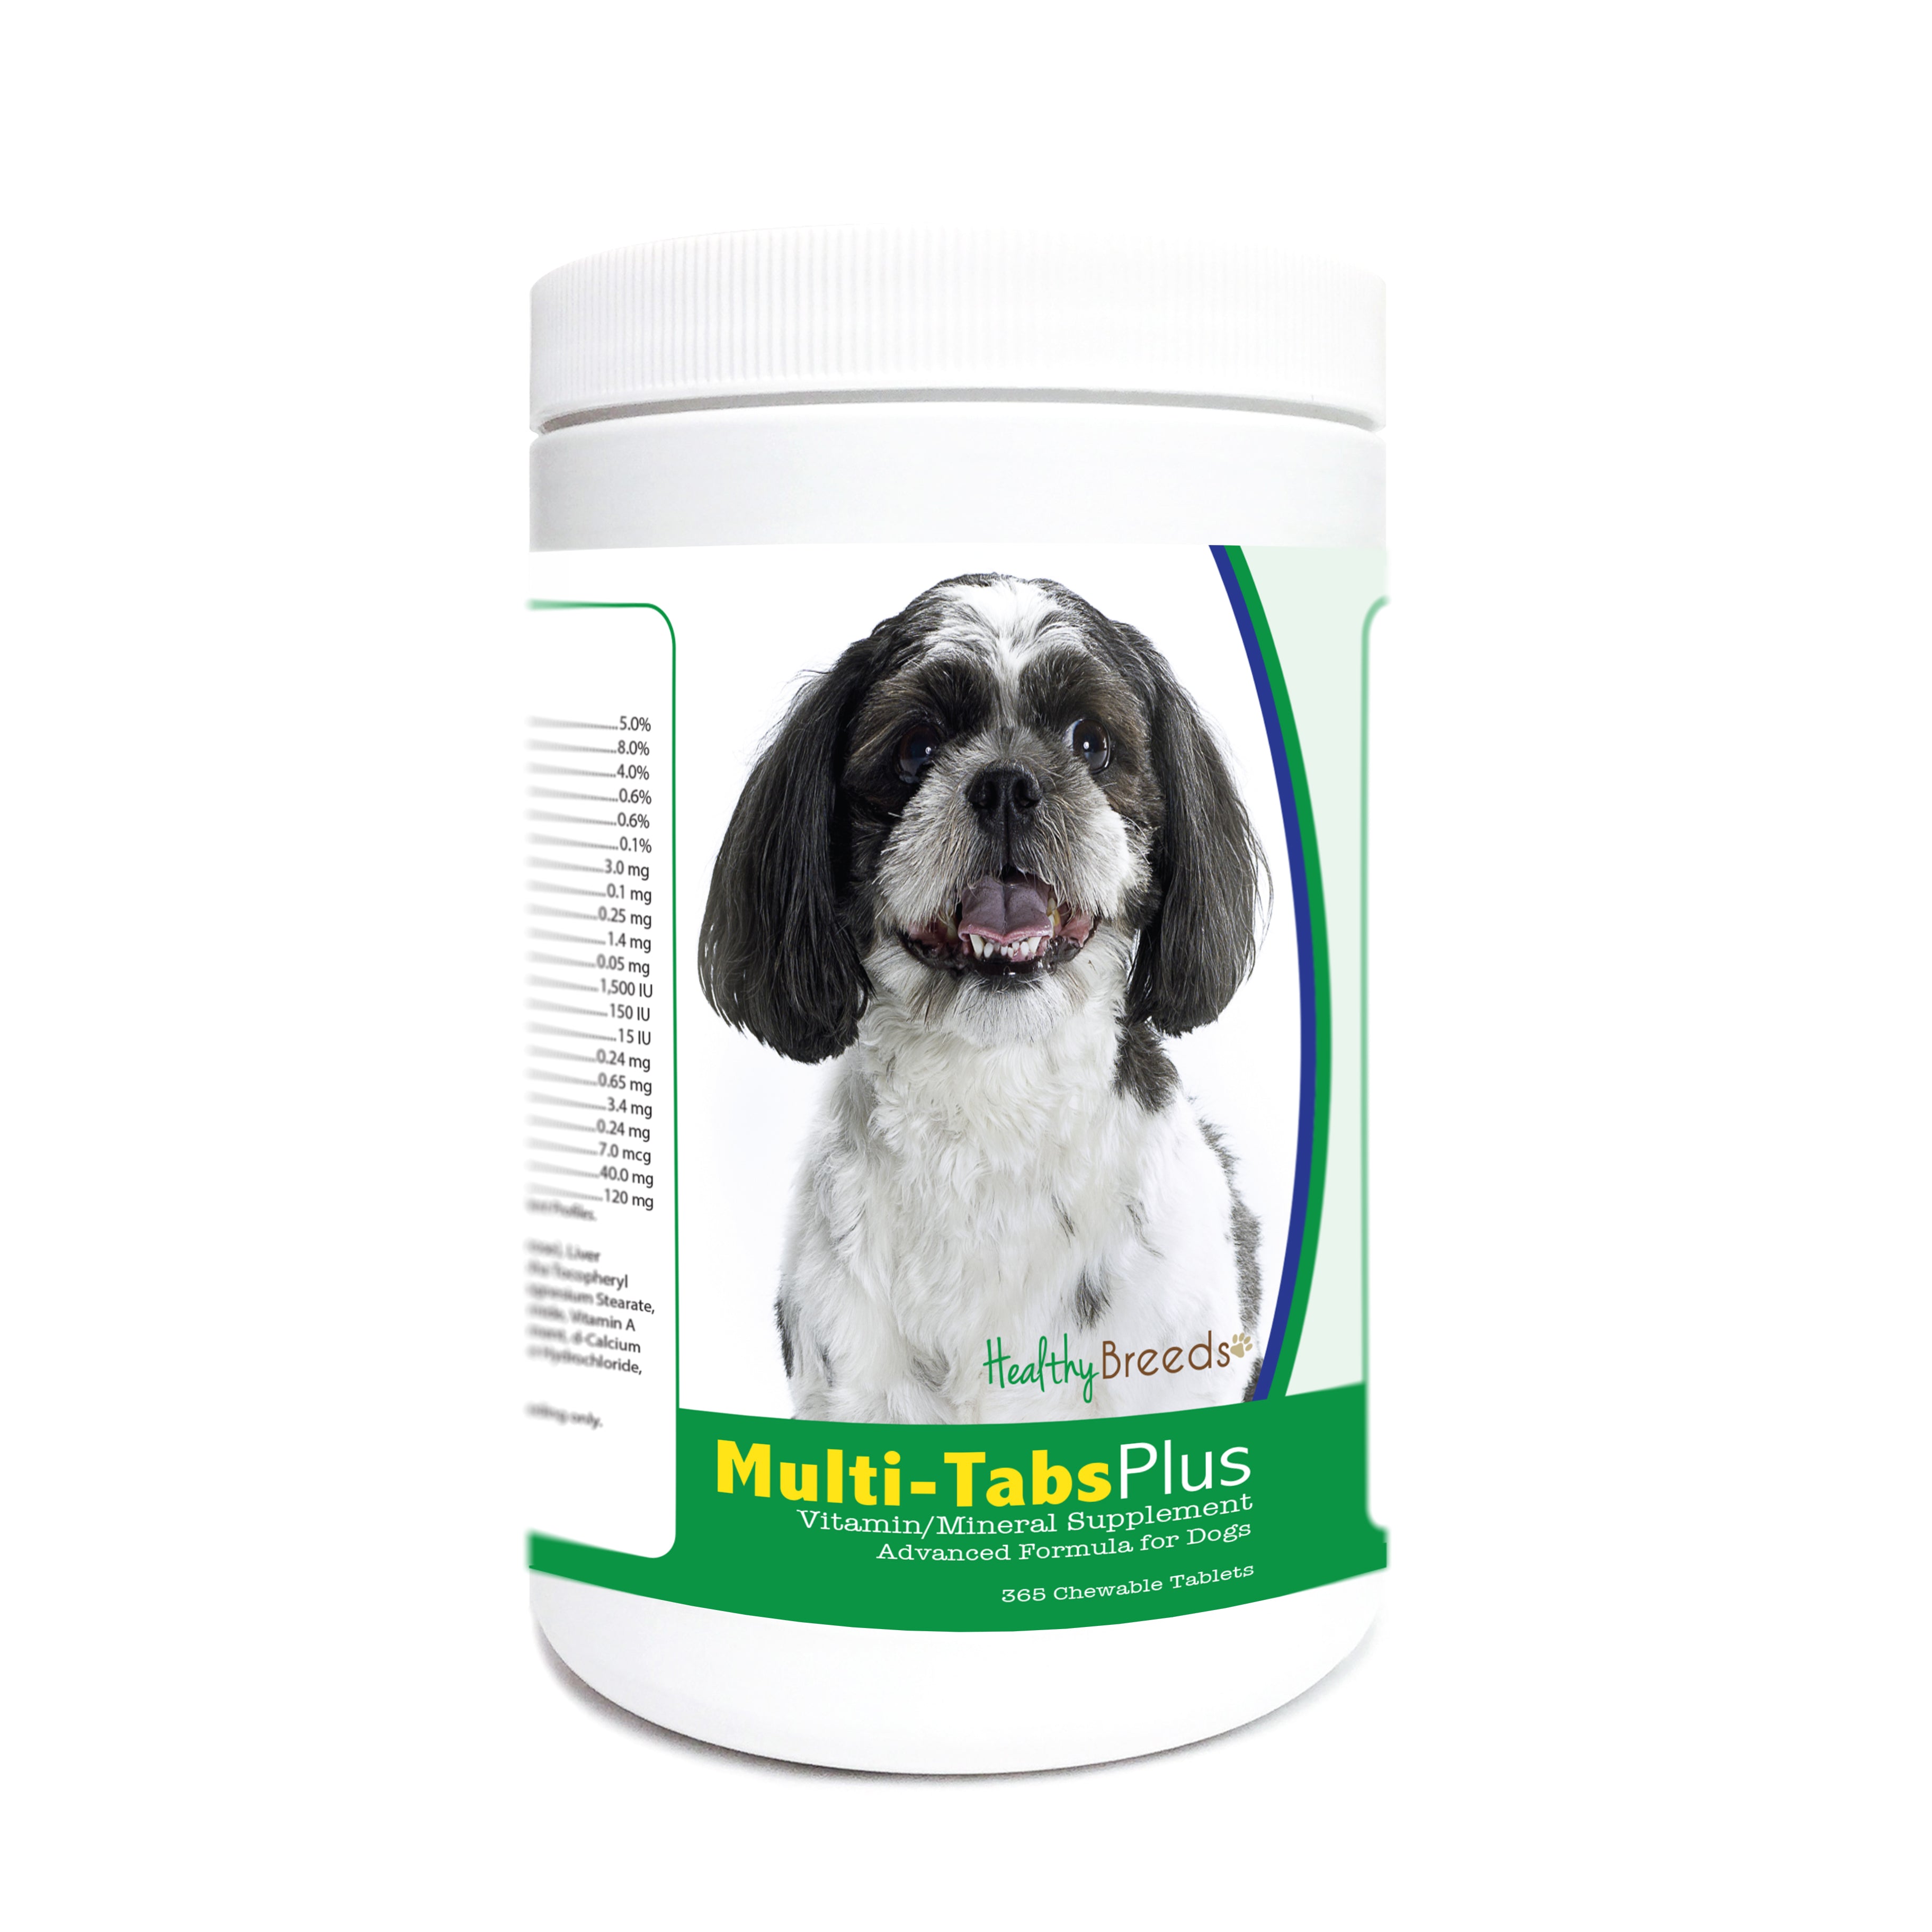 Shih-Poo Multi-Tabs Plus Chewable Tablets 365 Count